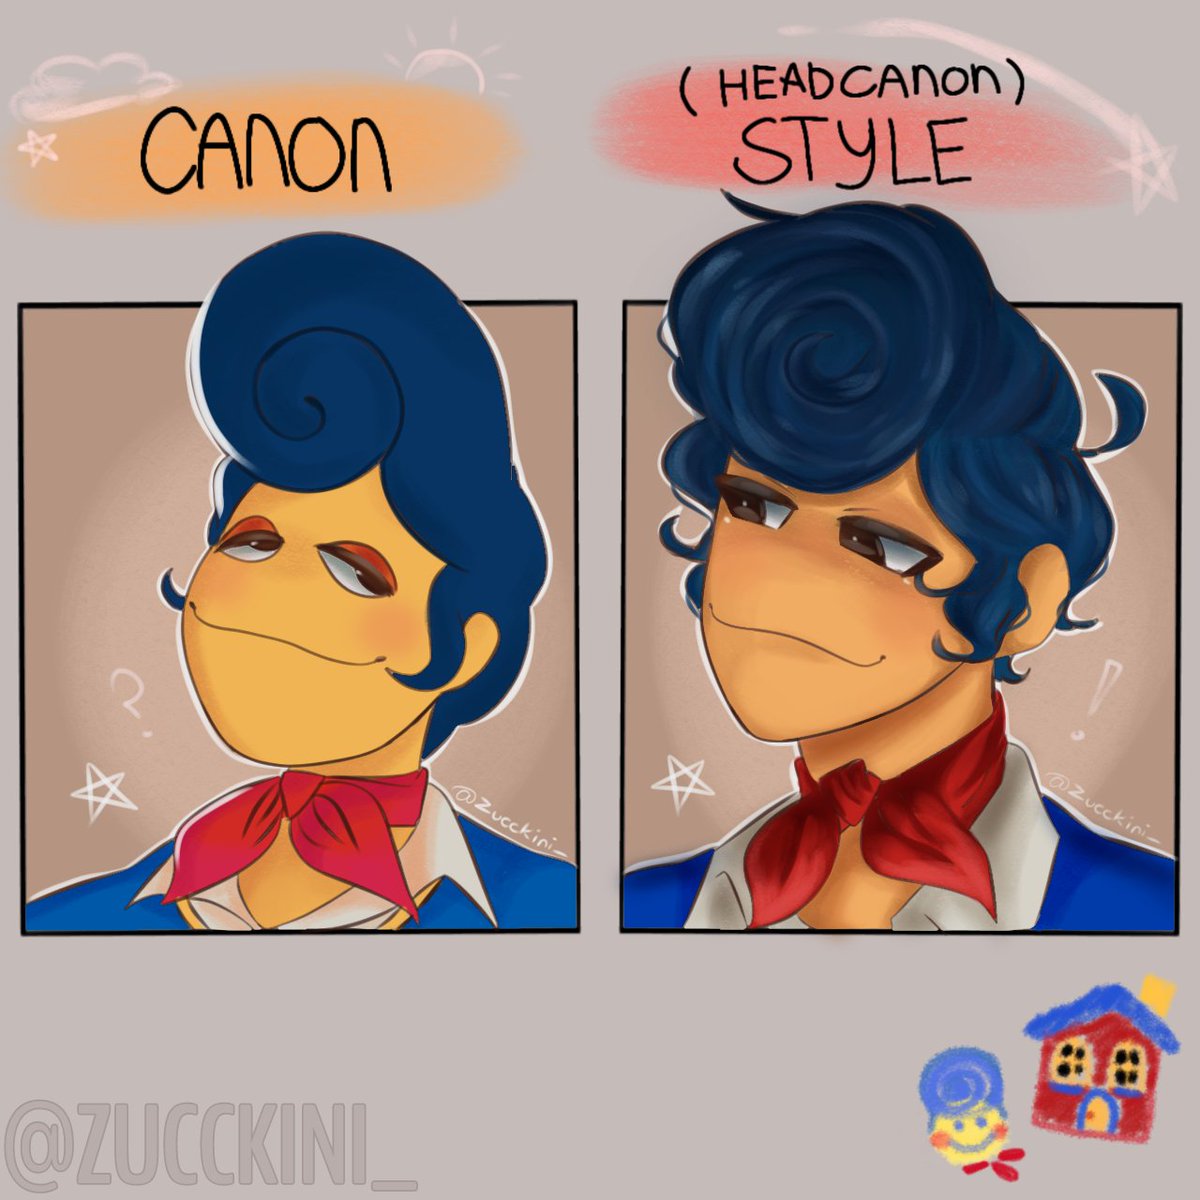 Canon and my style 🍎 (Wally)

#welcomehomepuppetshow
#WelcomeHome #WallyDarling